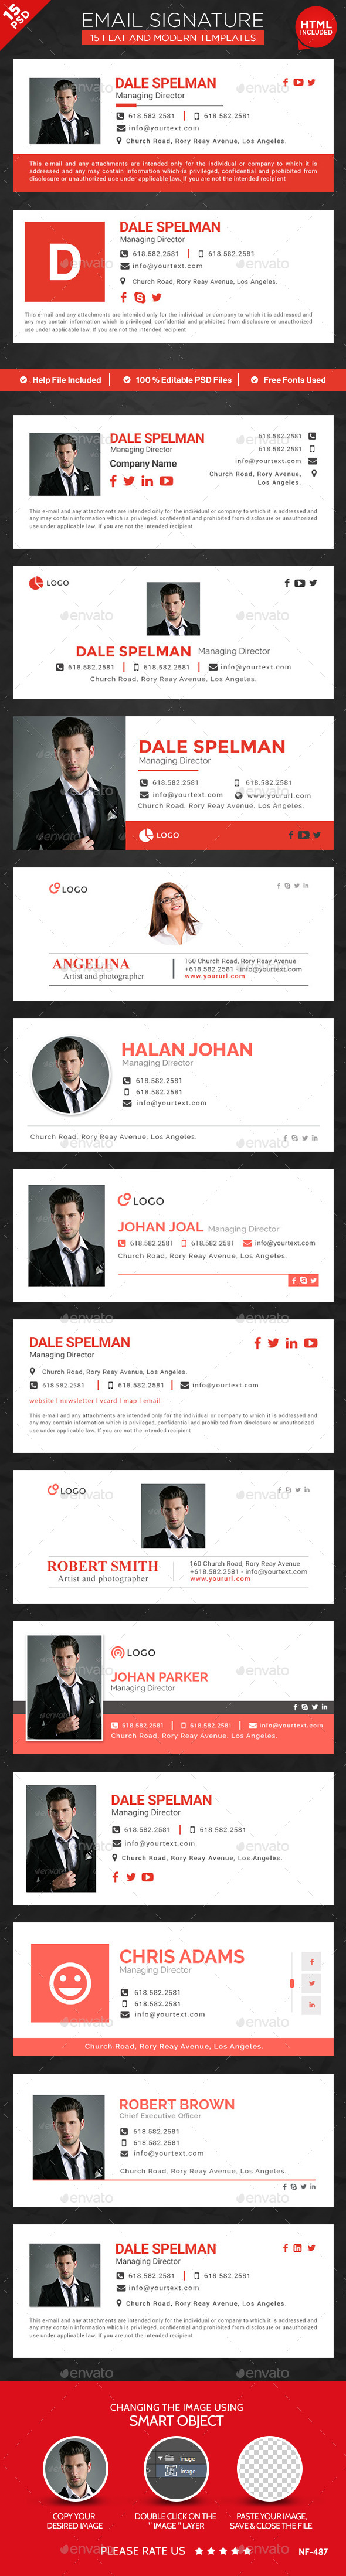 15 Email Signature Templates - HTML Files Included